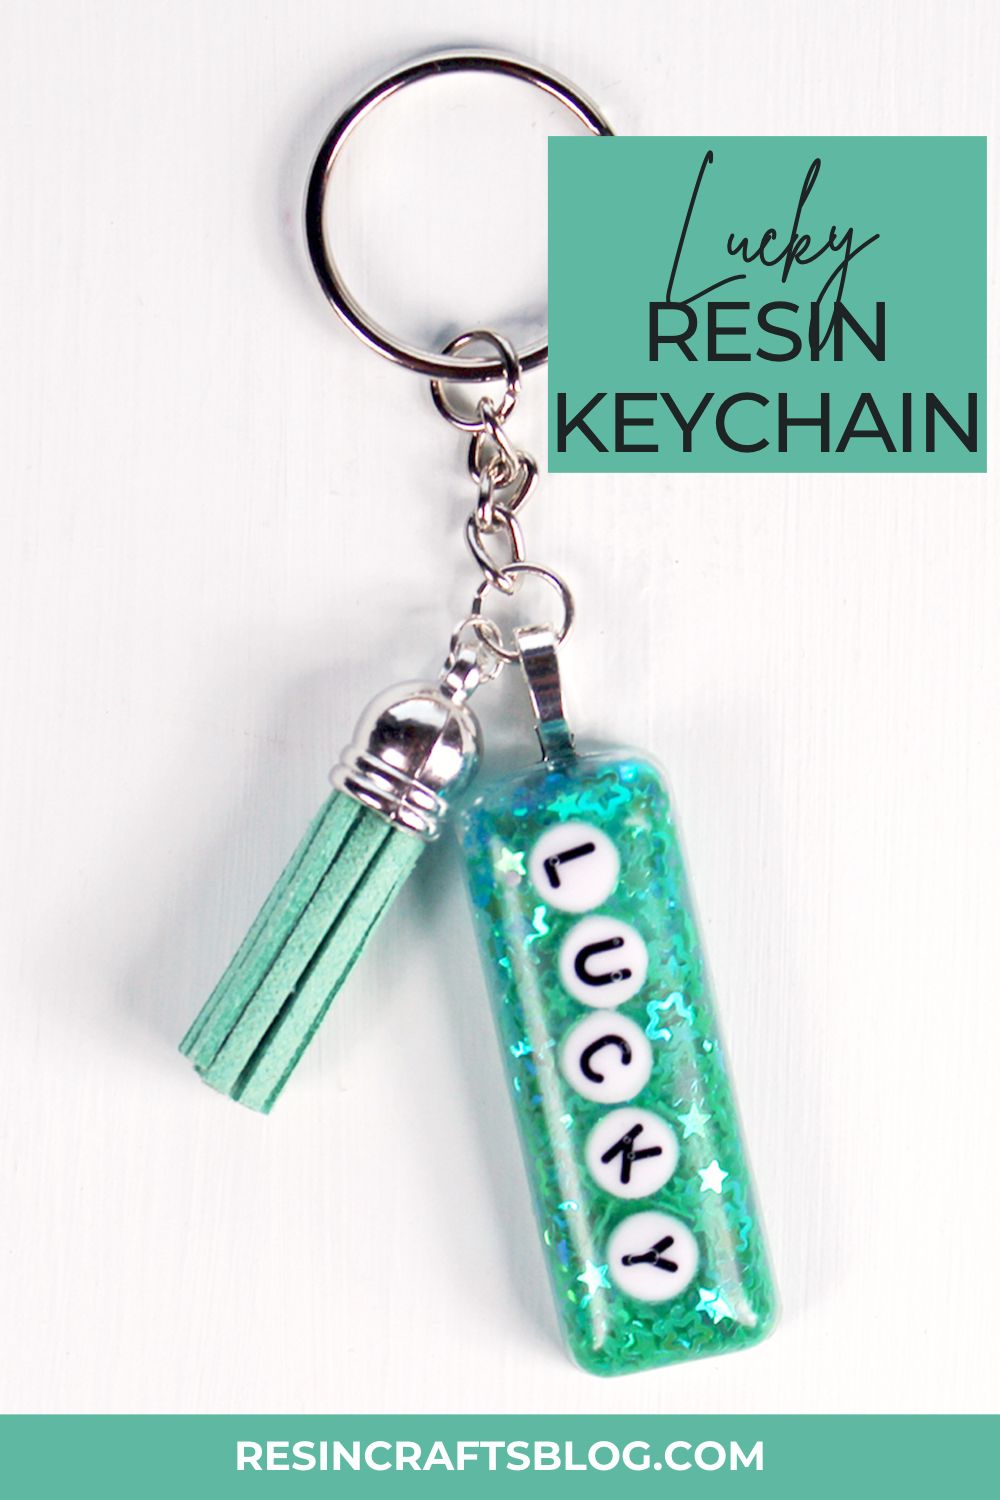 Make a lucky glitter resin keychain quickly with Amazing Clear Cast Epoxy. This cute and glittery keychain is the perfect pinch-proof accessory for St. Patricks day, or year round to make those keys unique. #resincraftsblog #resin #resincrafts via @resincraftsblog